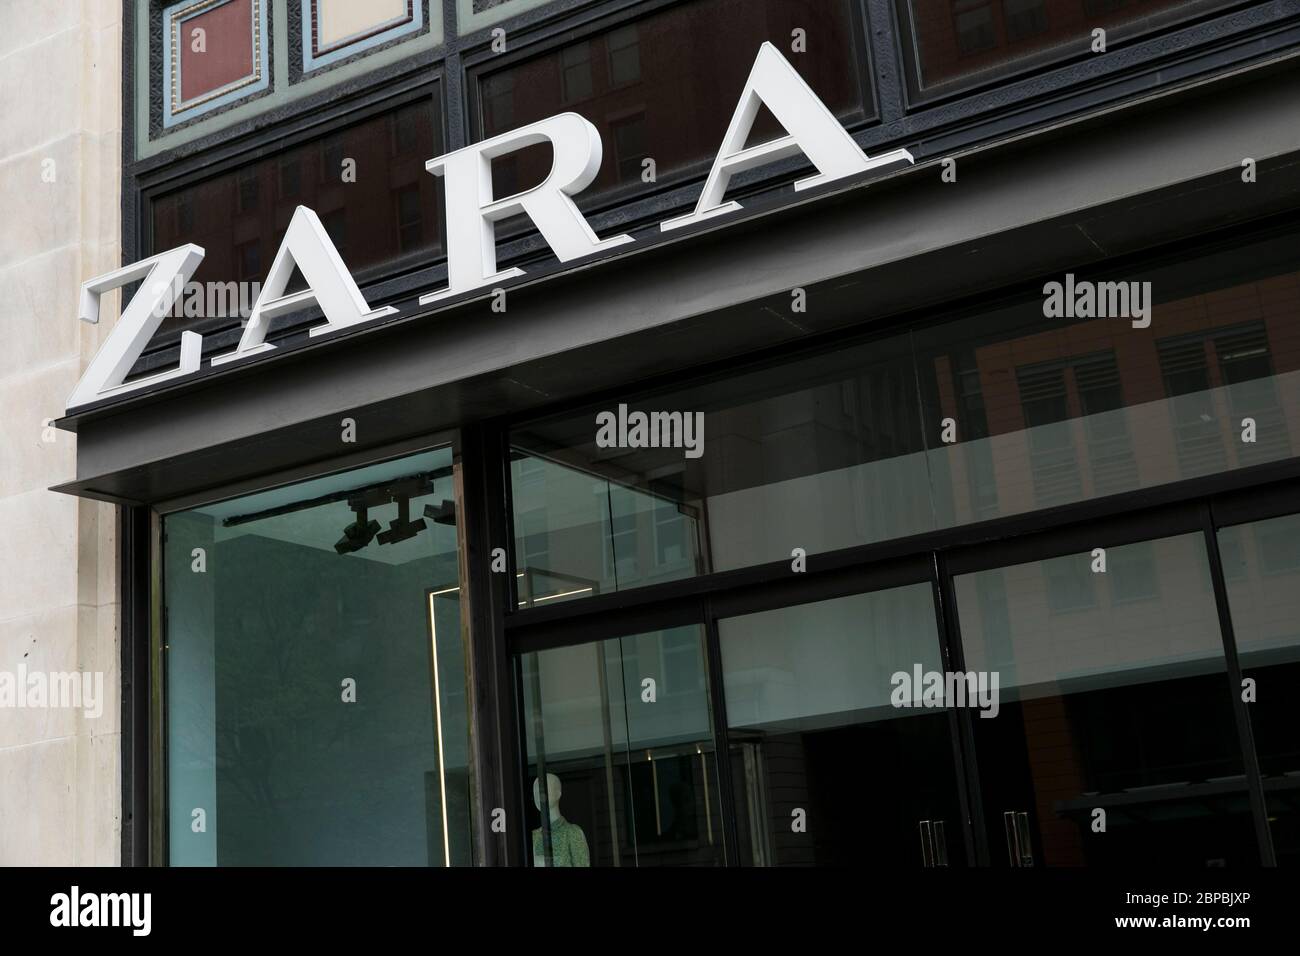 Page 2 - Zara Sign High Resolution Stock Photography and Images - Alamy